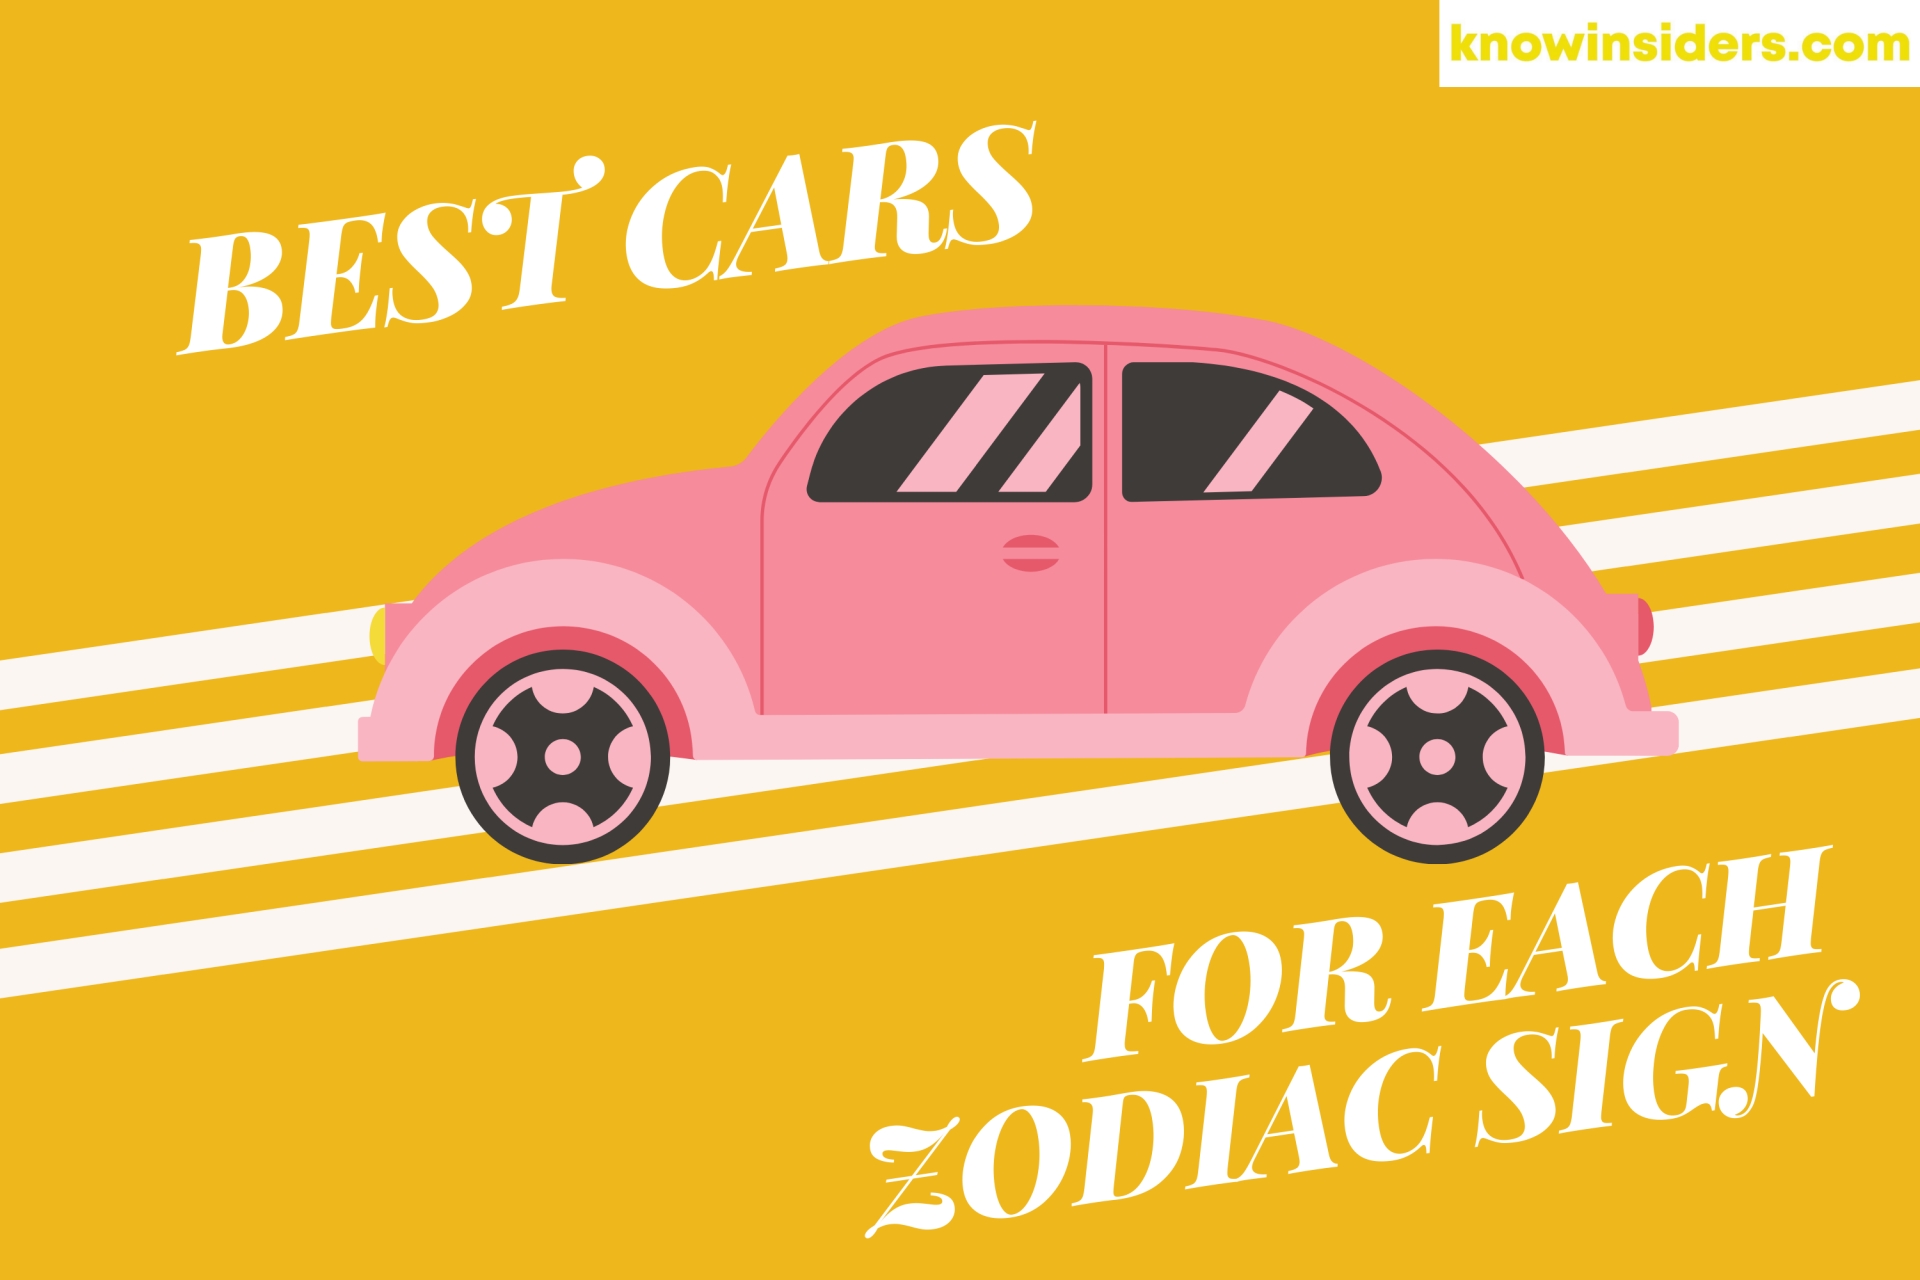 Best Cars Suited to Each Zodiac Sign